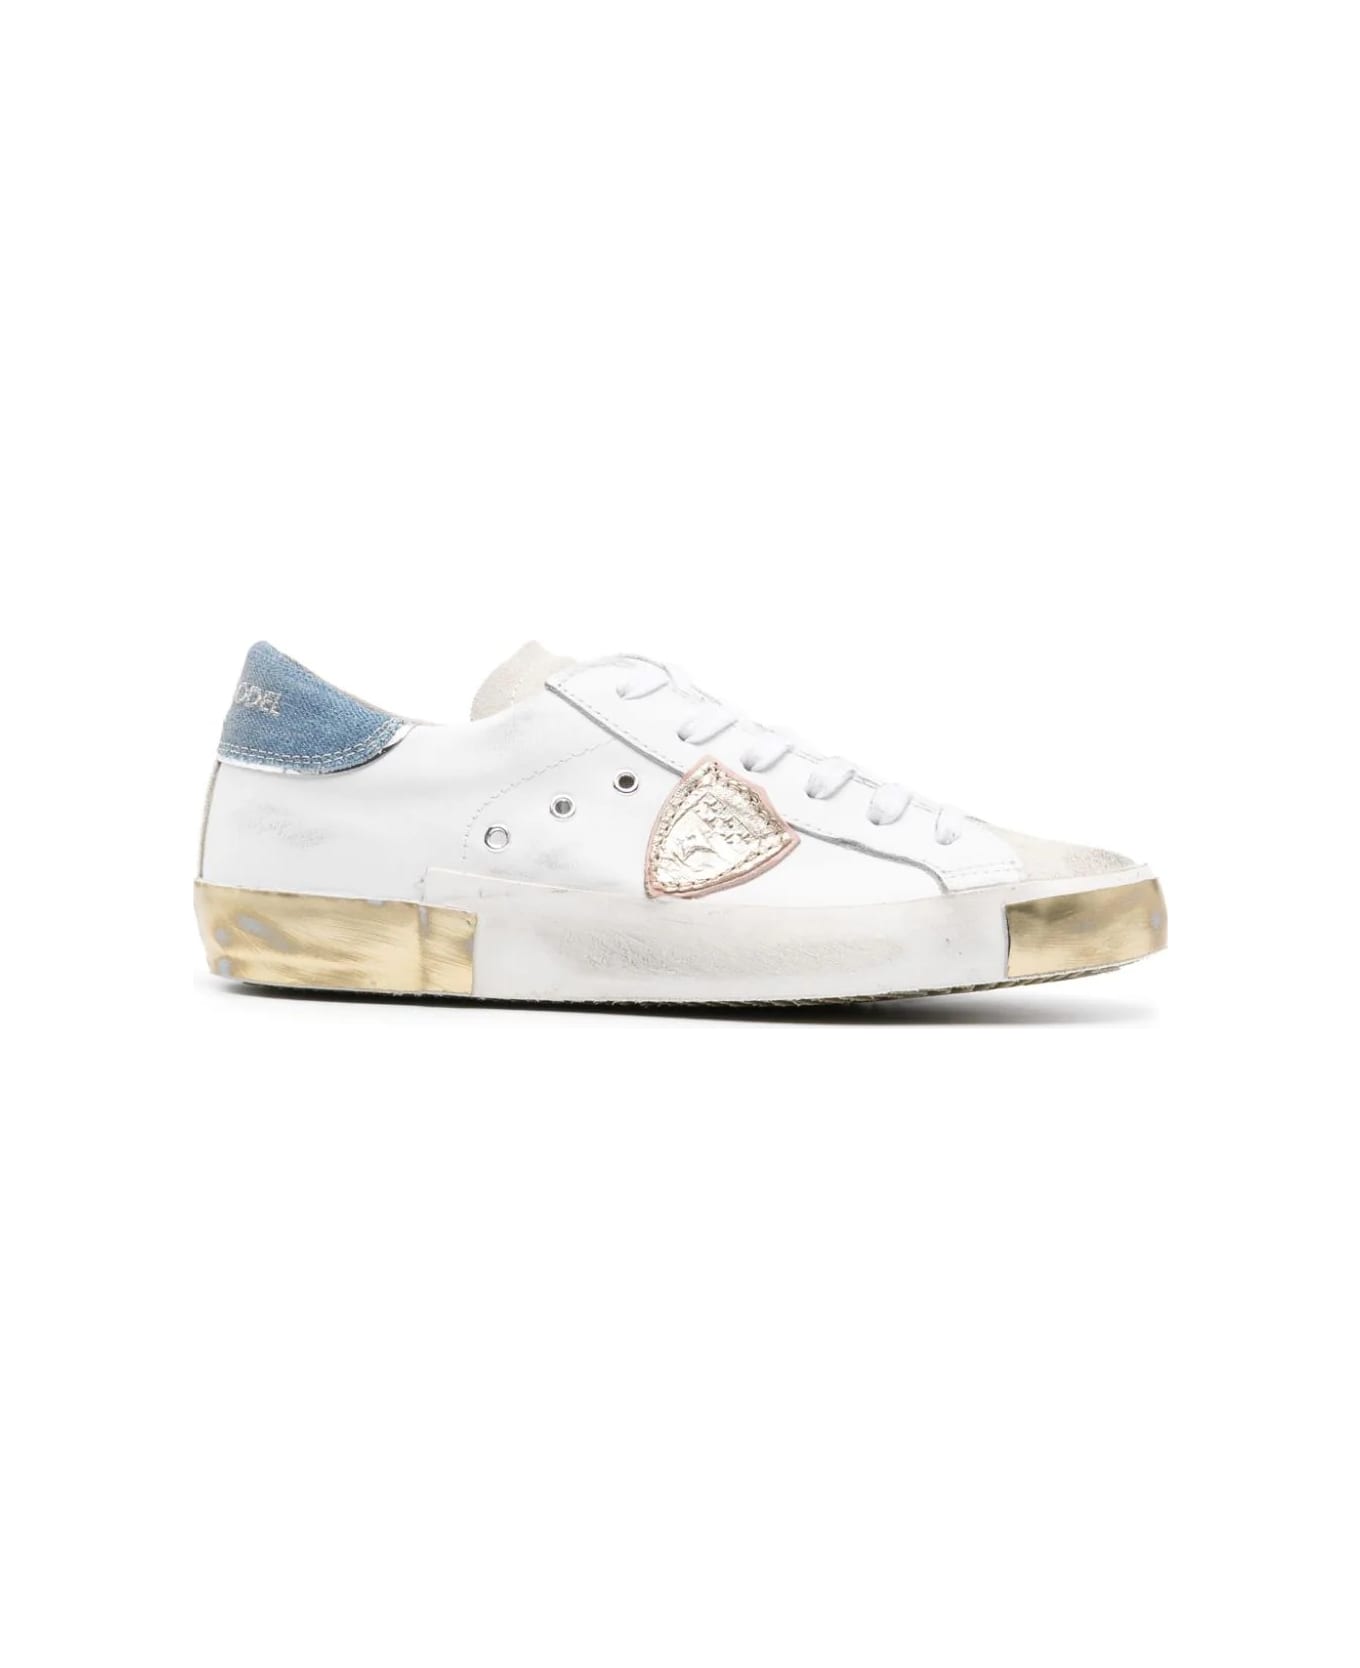 Philippe Model Prsx Low Sneakers - White And Light Blue - White